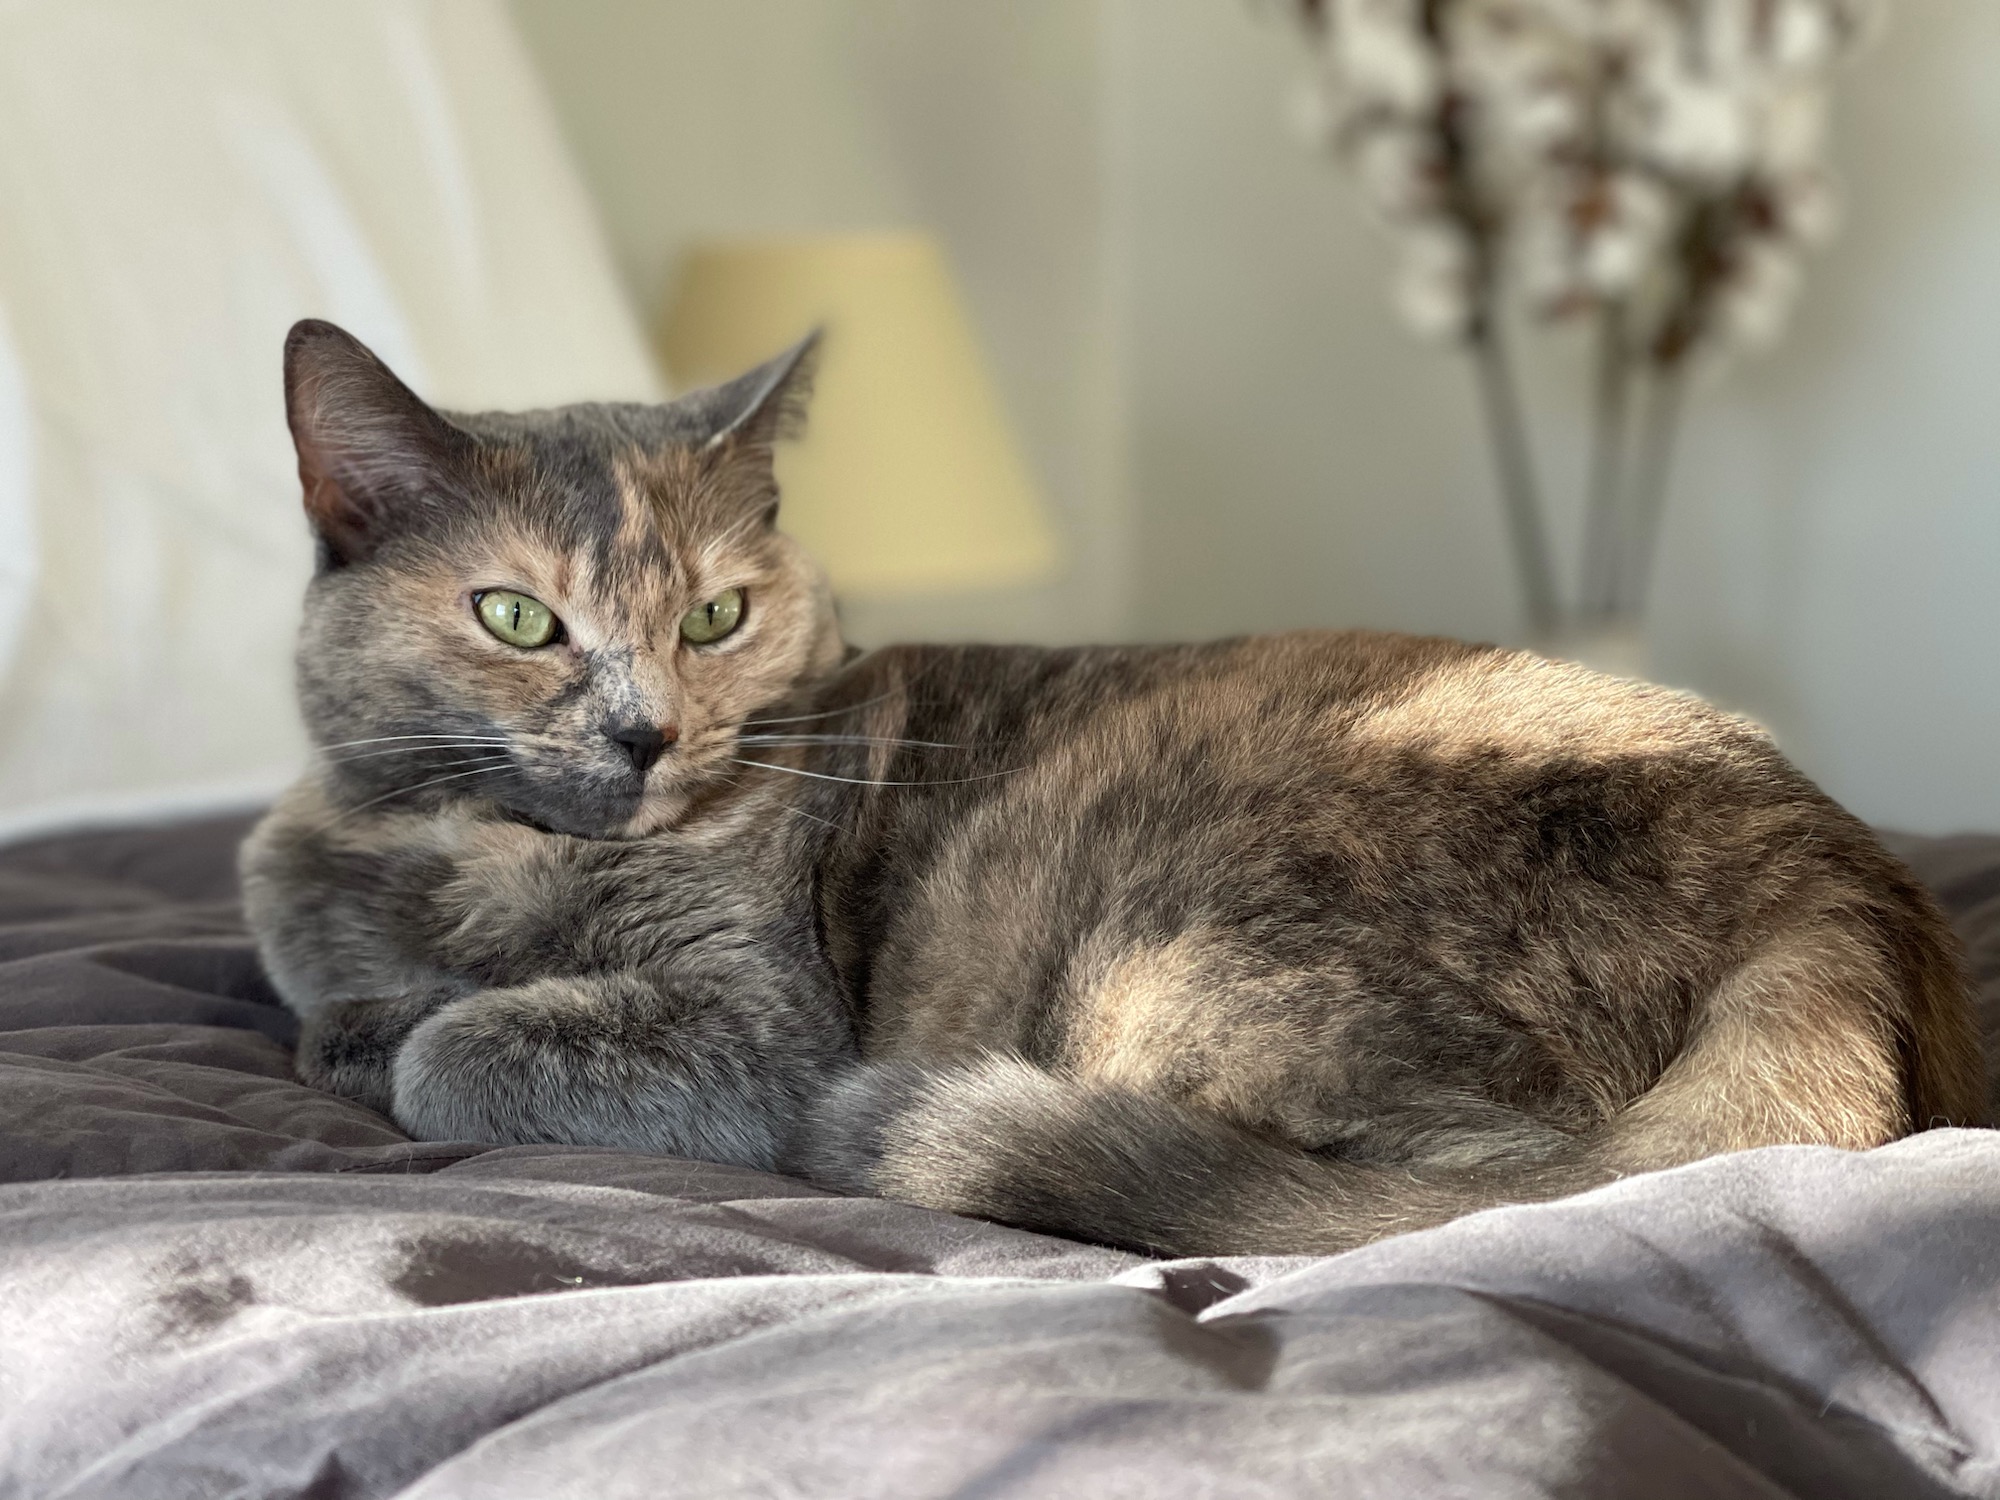 https://www.askamanager.org/wp-content/uploads/2021/02/Eve-is-the-most-beautiful-cat-in-the-world.jpeg